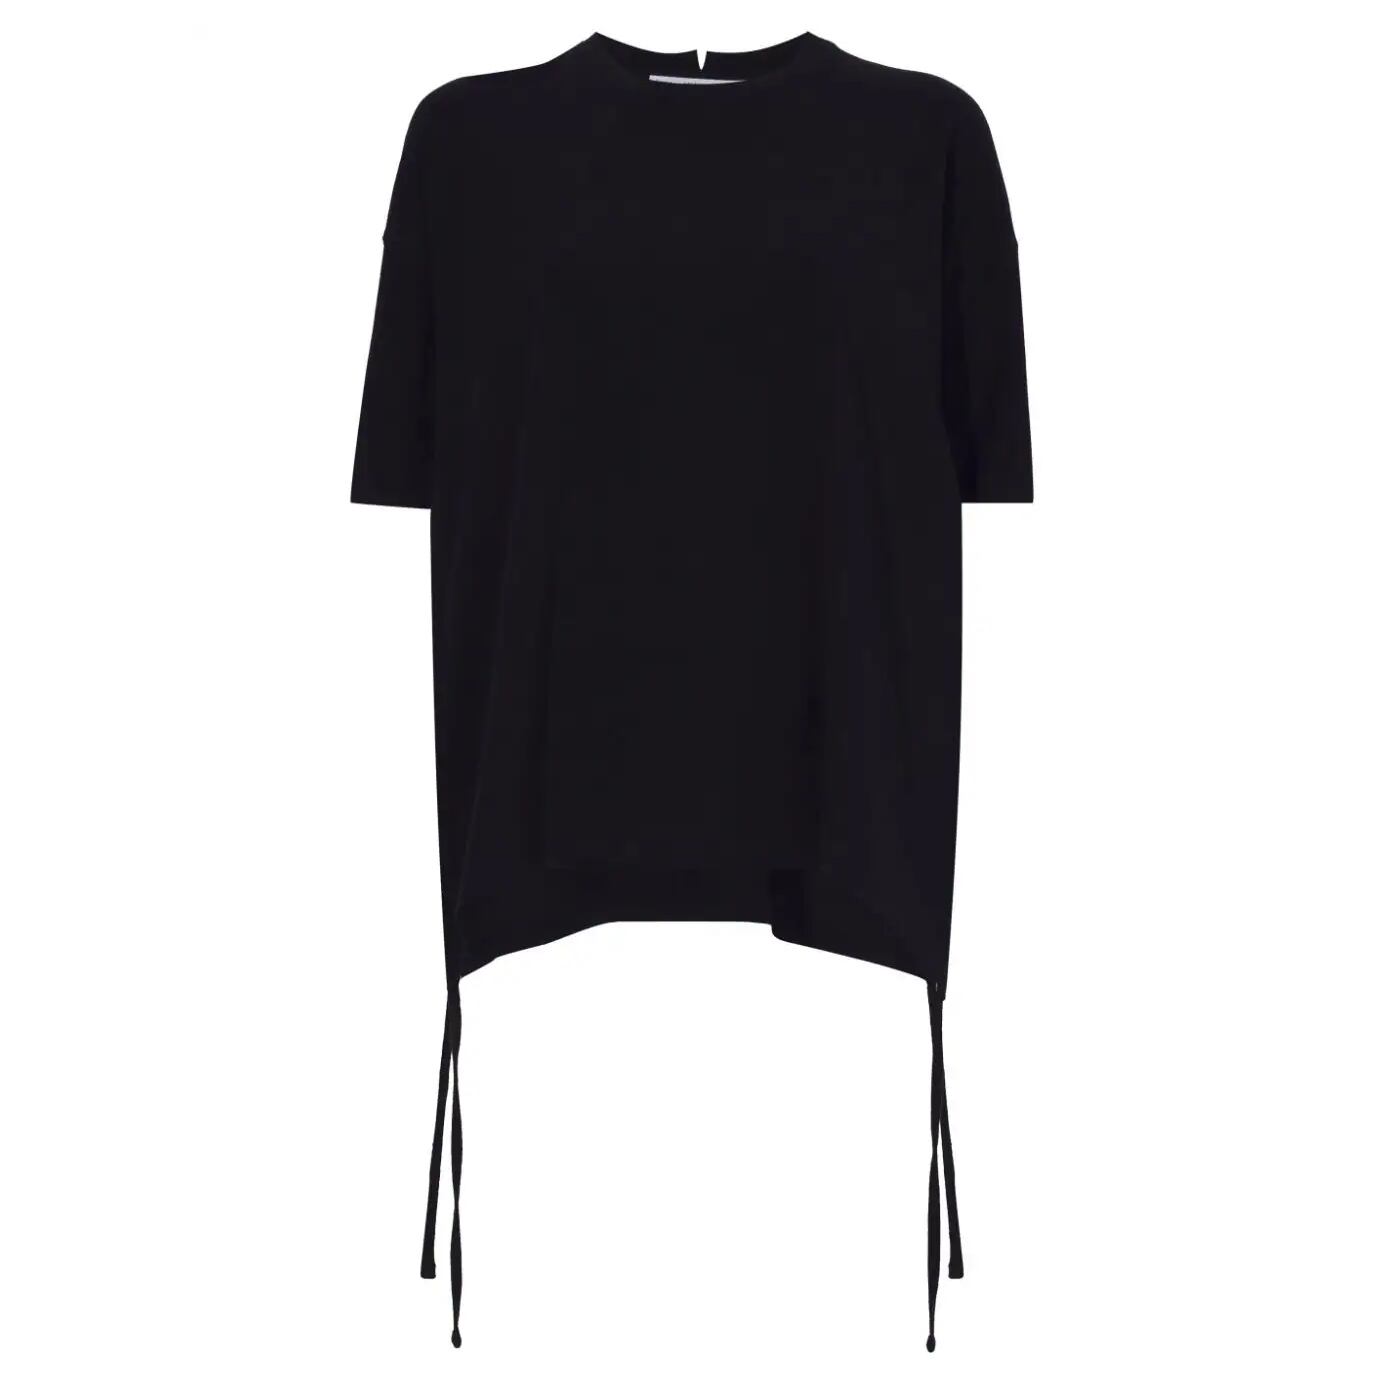 Proenza Schouler White Label　RELAXED SIDE TIE T-SHIRT　BLACK